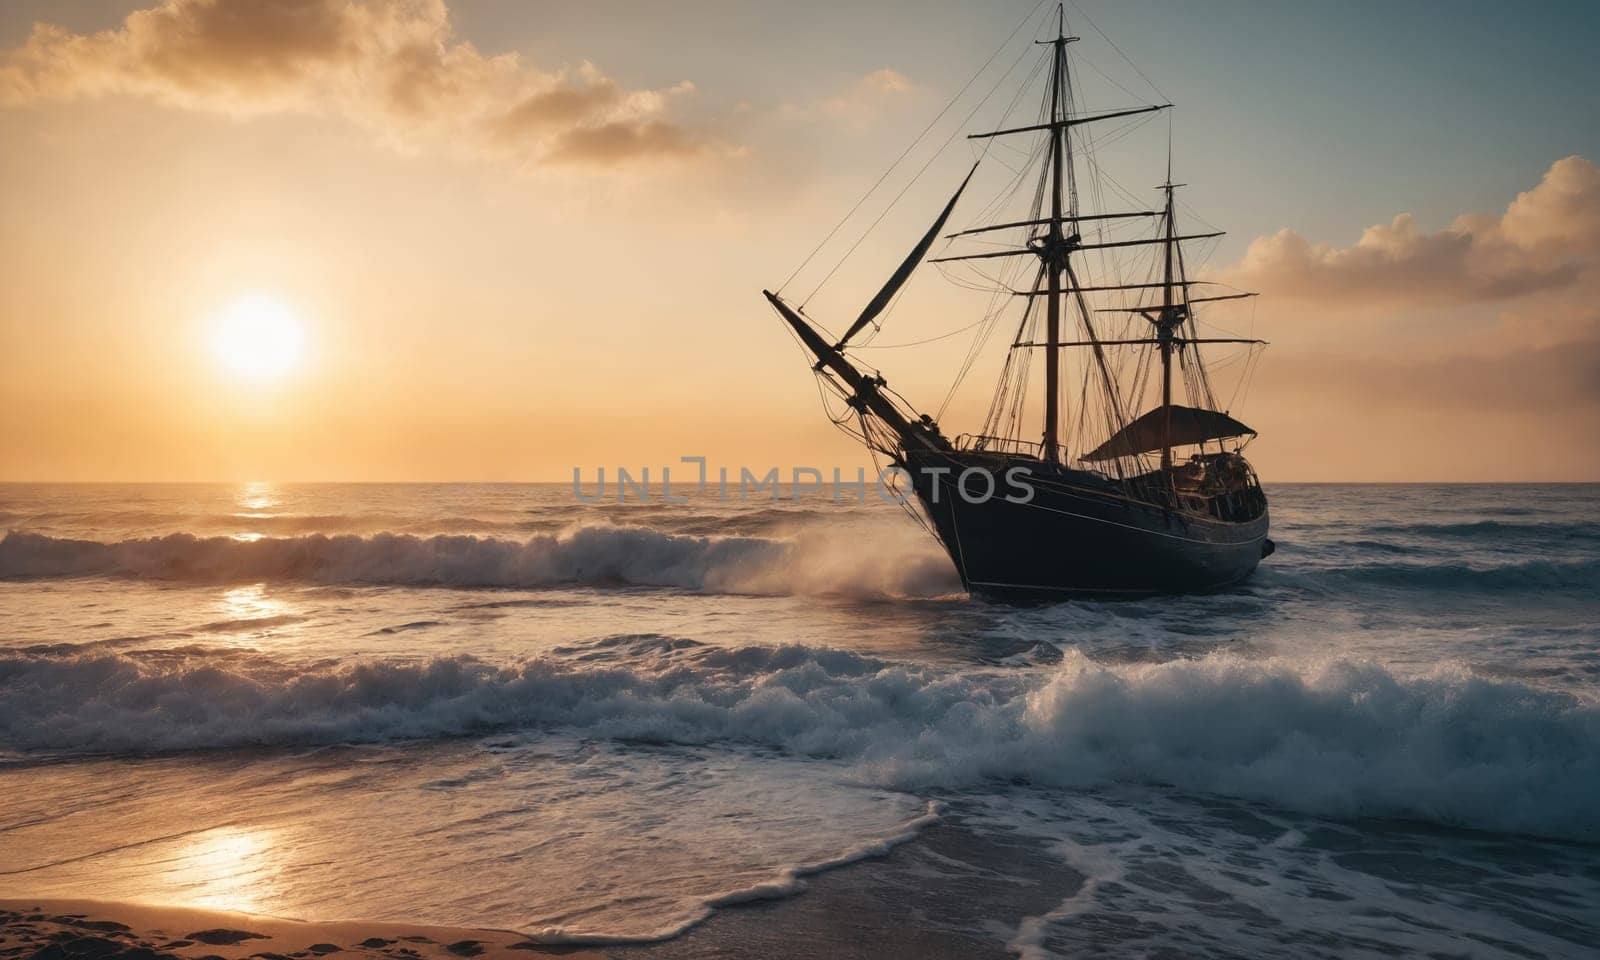 boat on the ocean waves against the backdrop of a breathtaking sunset. The golden hour of light creates a calm and quiet atmosphere.